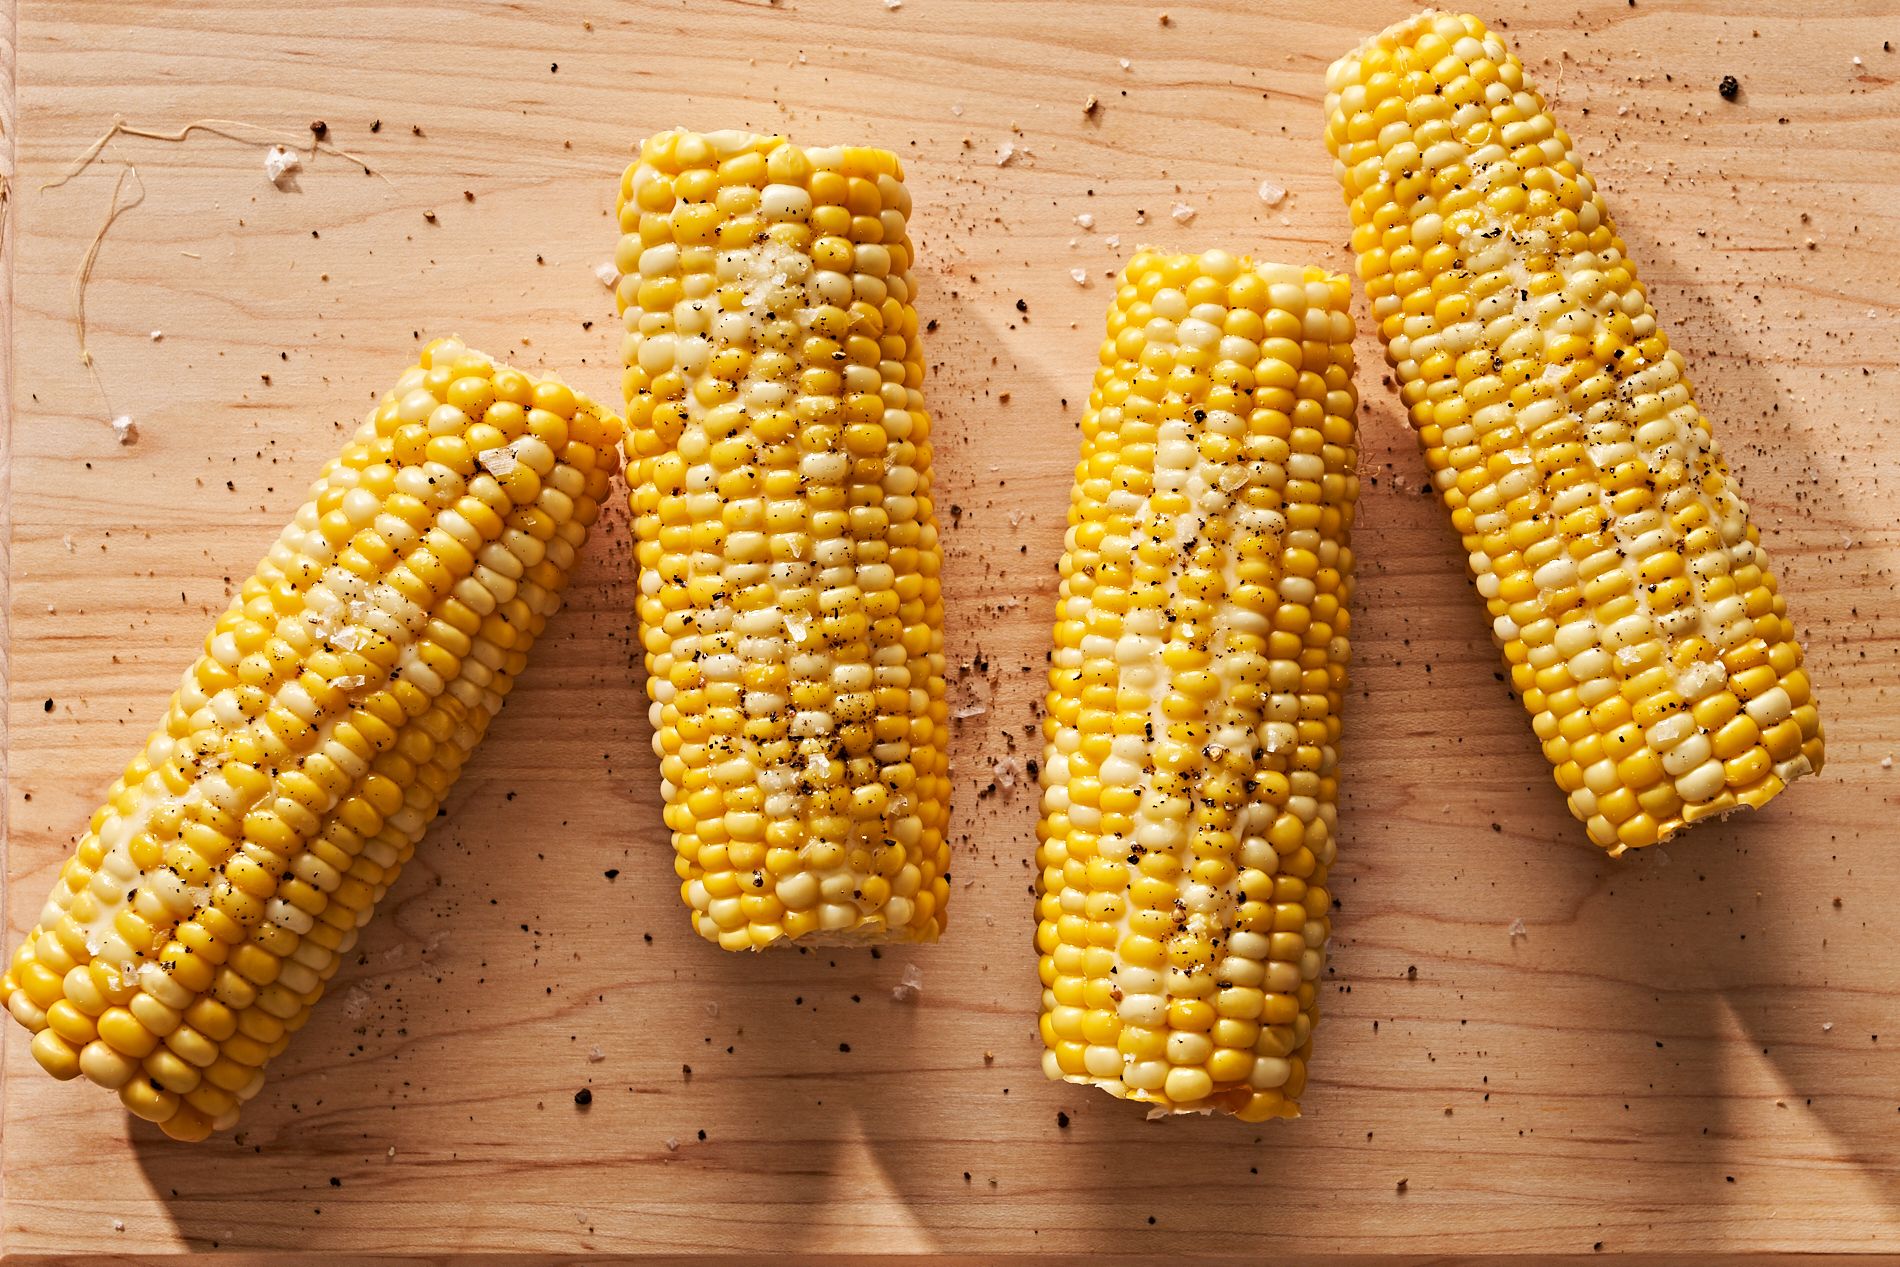 Instant Pot Corn On The Cob Recipe - How To Make Corn In The Instant Pot